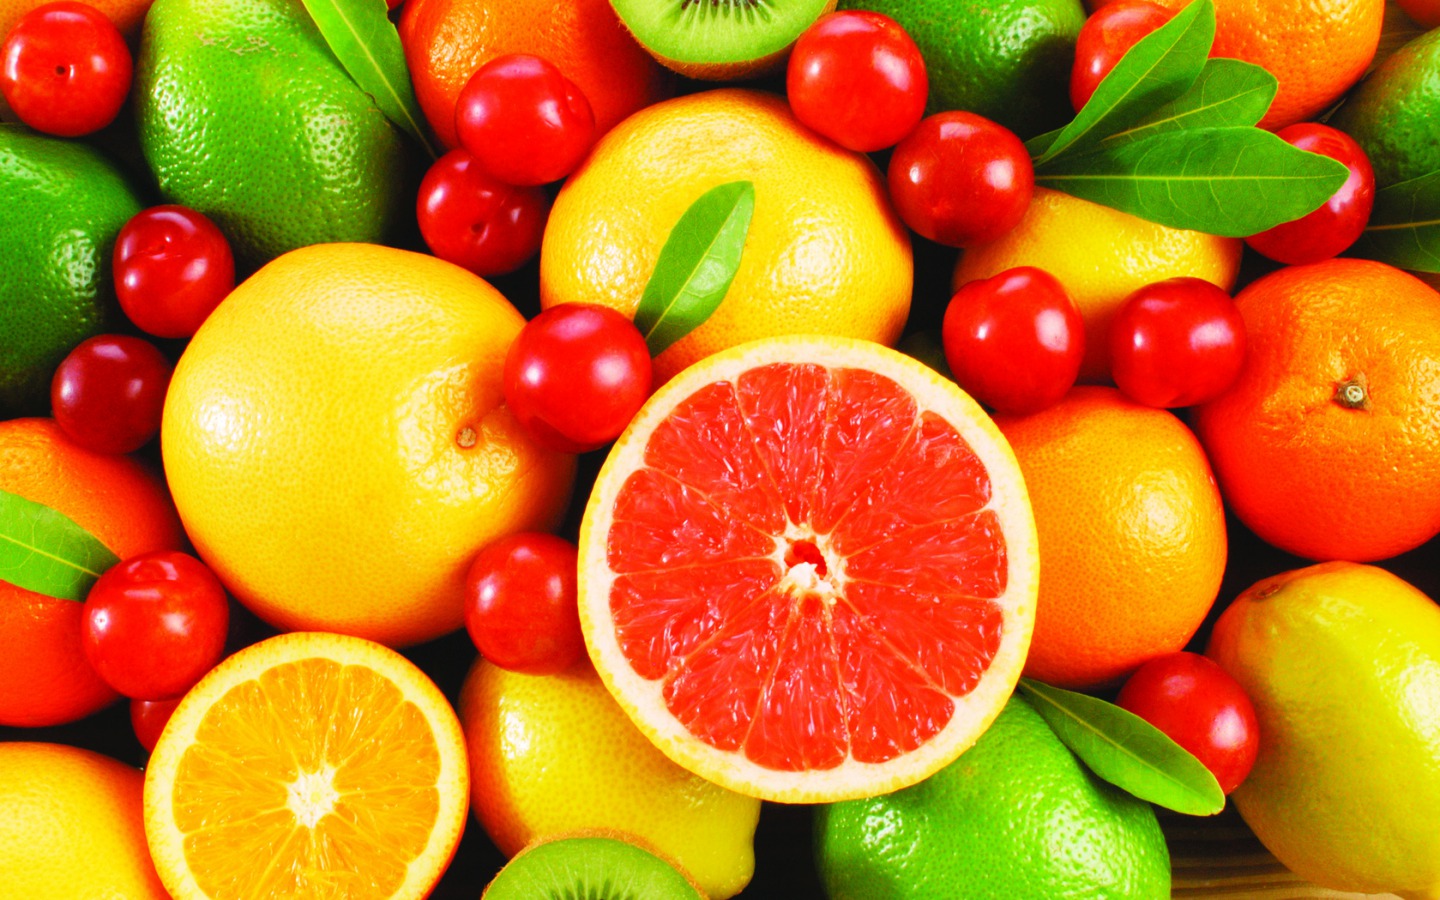 Food Image Fruit HD Wallpaper And Background Photos